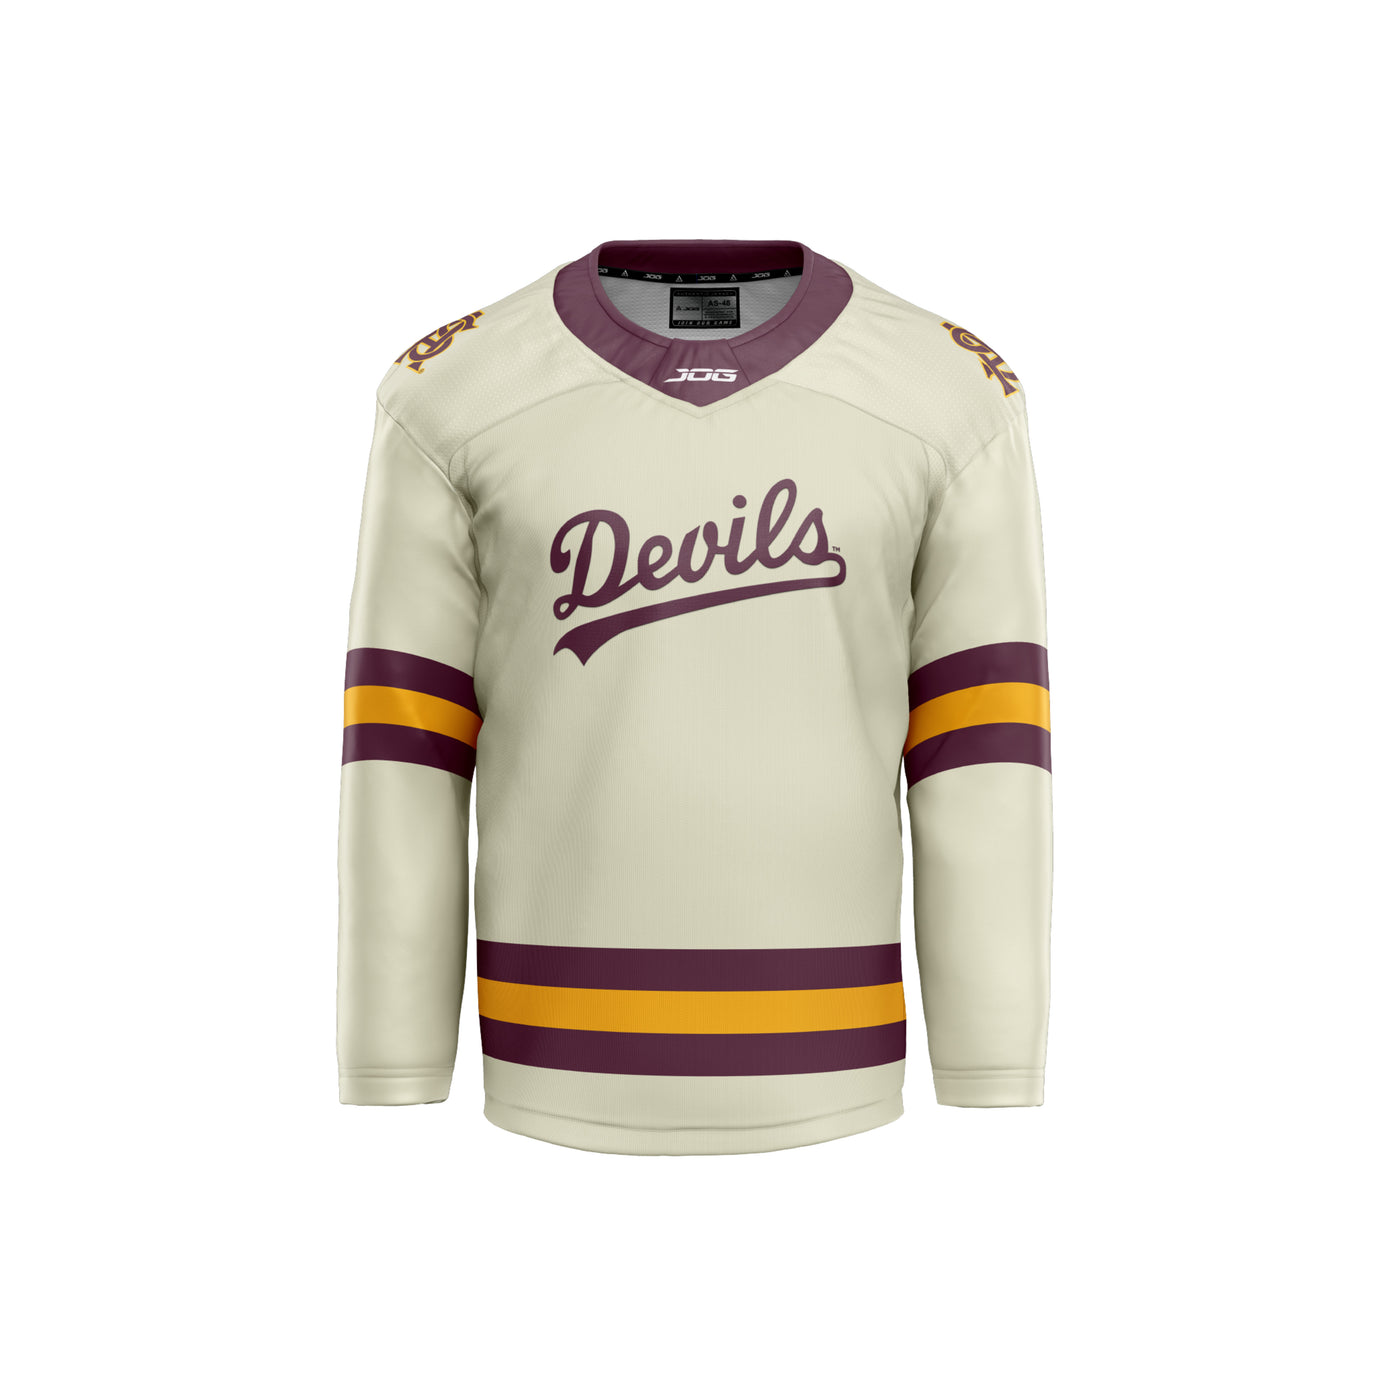 ASU cream colored hockey jersey with maroon and gold stripes on the arms and the waist line. The text 